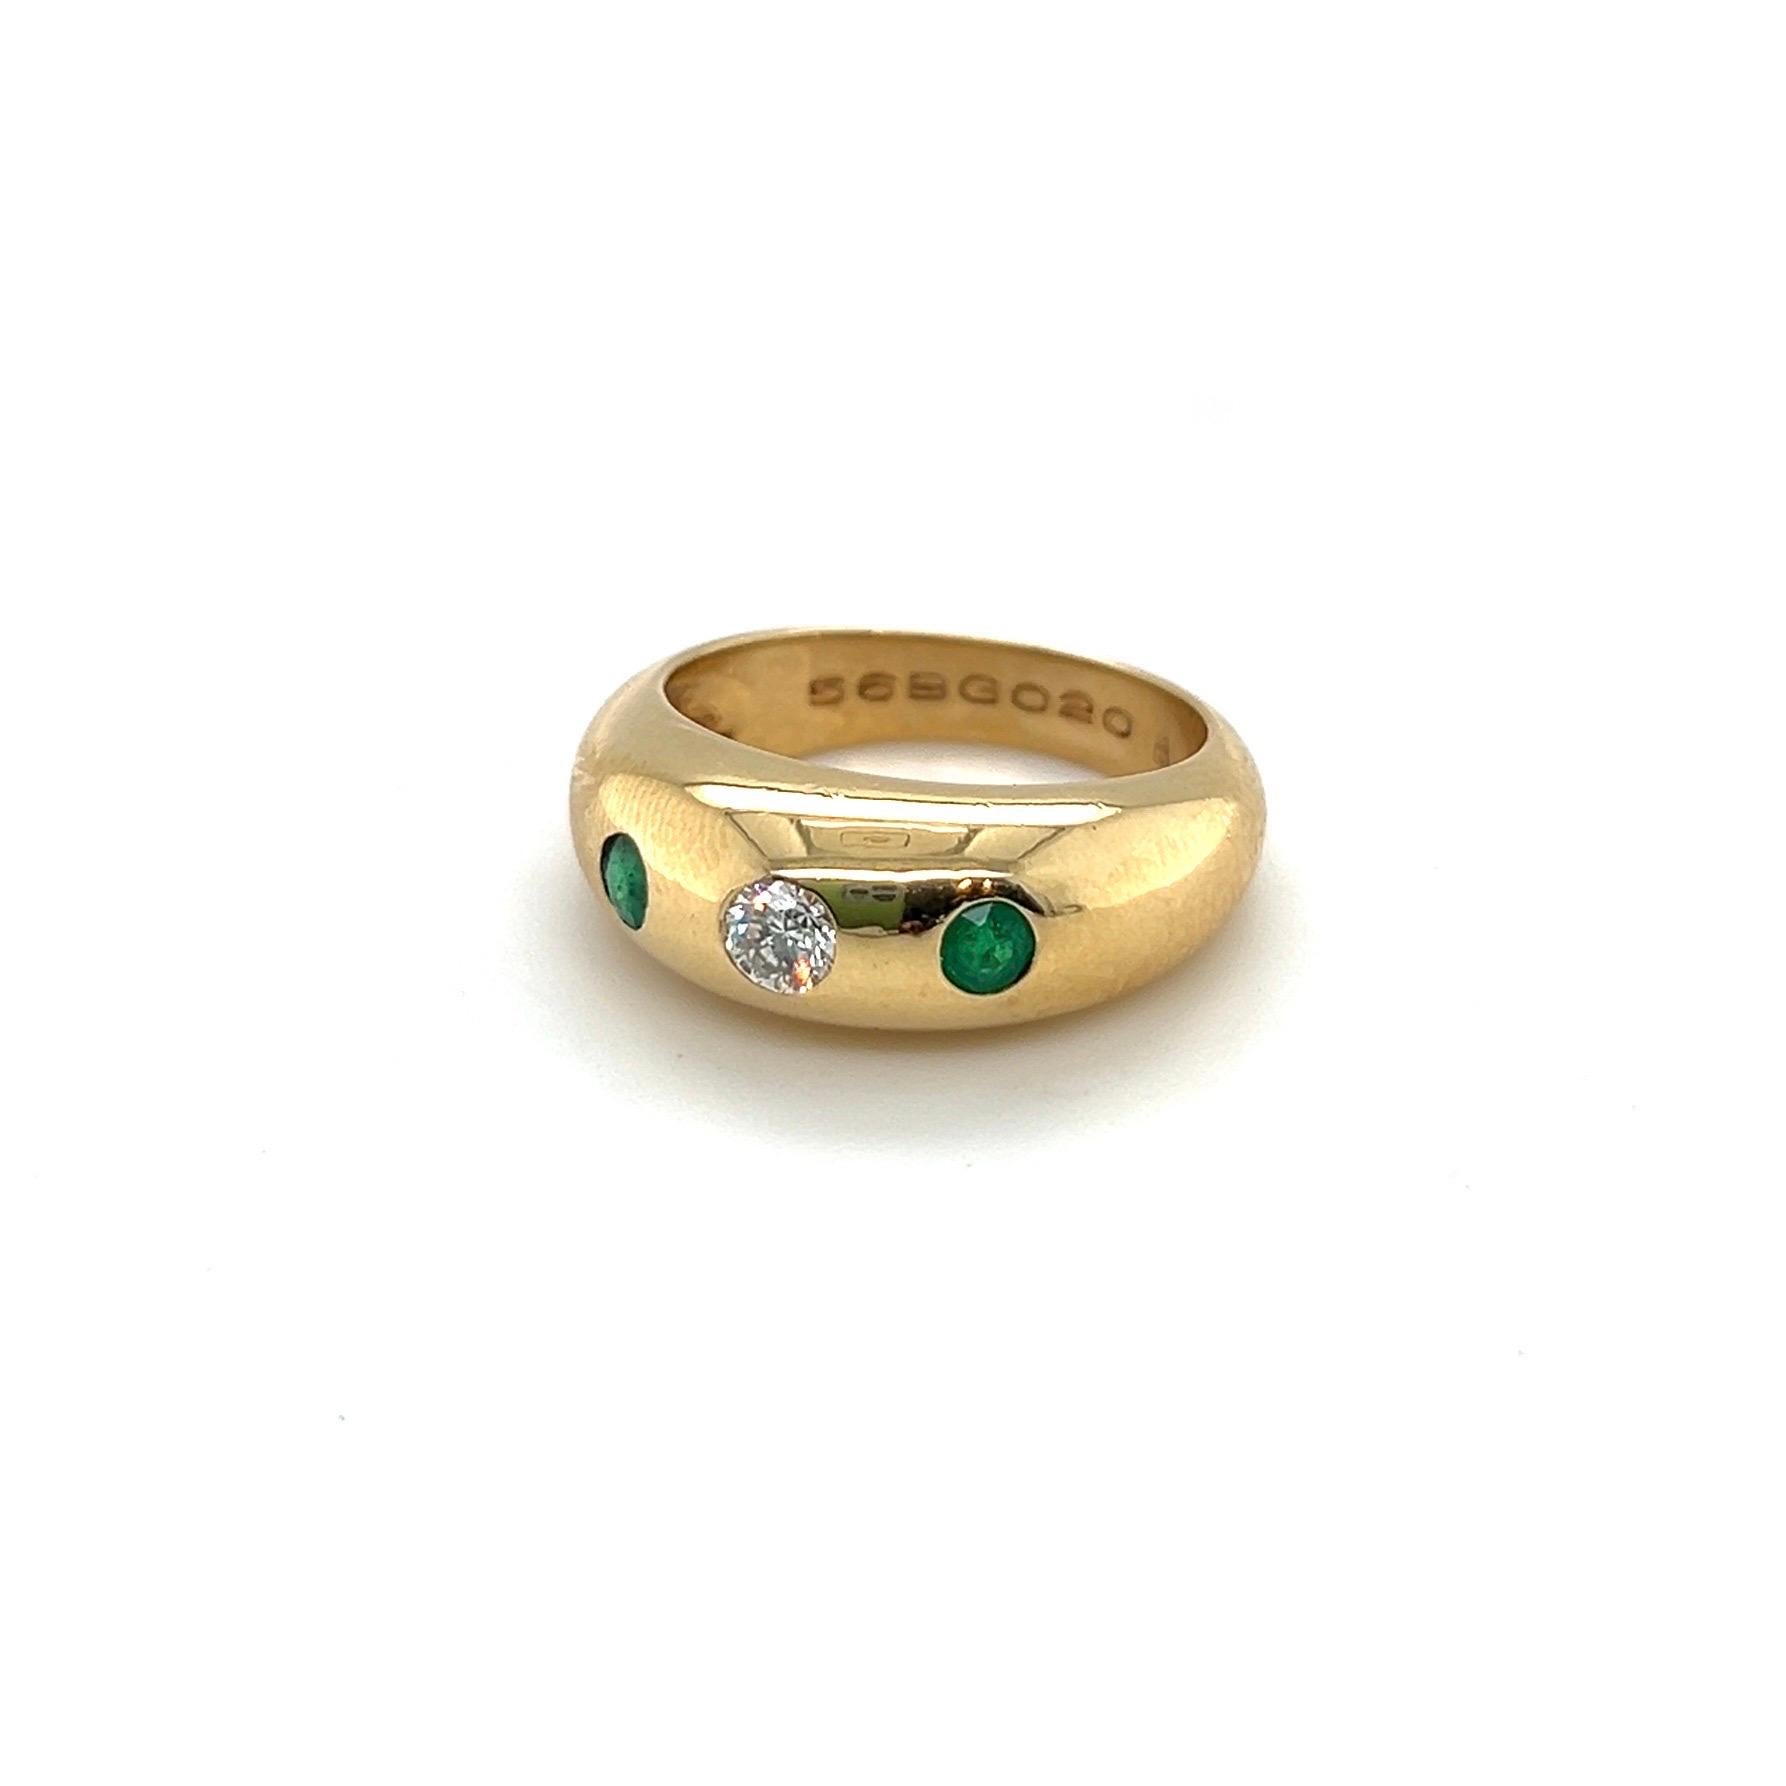 Classic and elegant 18 karat yellow gold, diamond and emerald ring by Cartier, 1980s.

Bandring of slightly domed design, centering upon a brilliant-cut diamond of circa 0.18 carats, flanked by two round emeralds totalling circa 0.15 carats. The